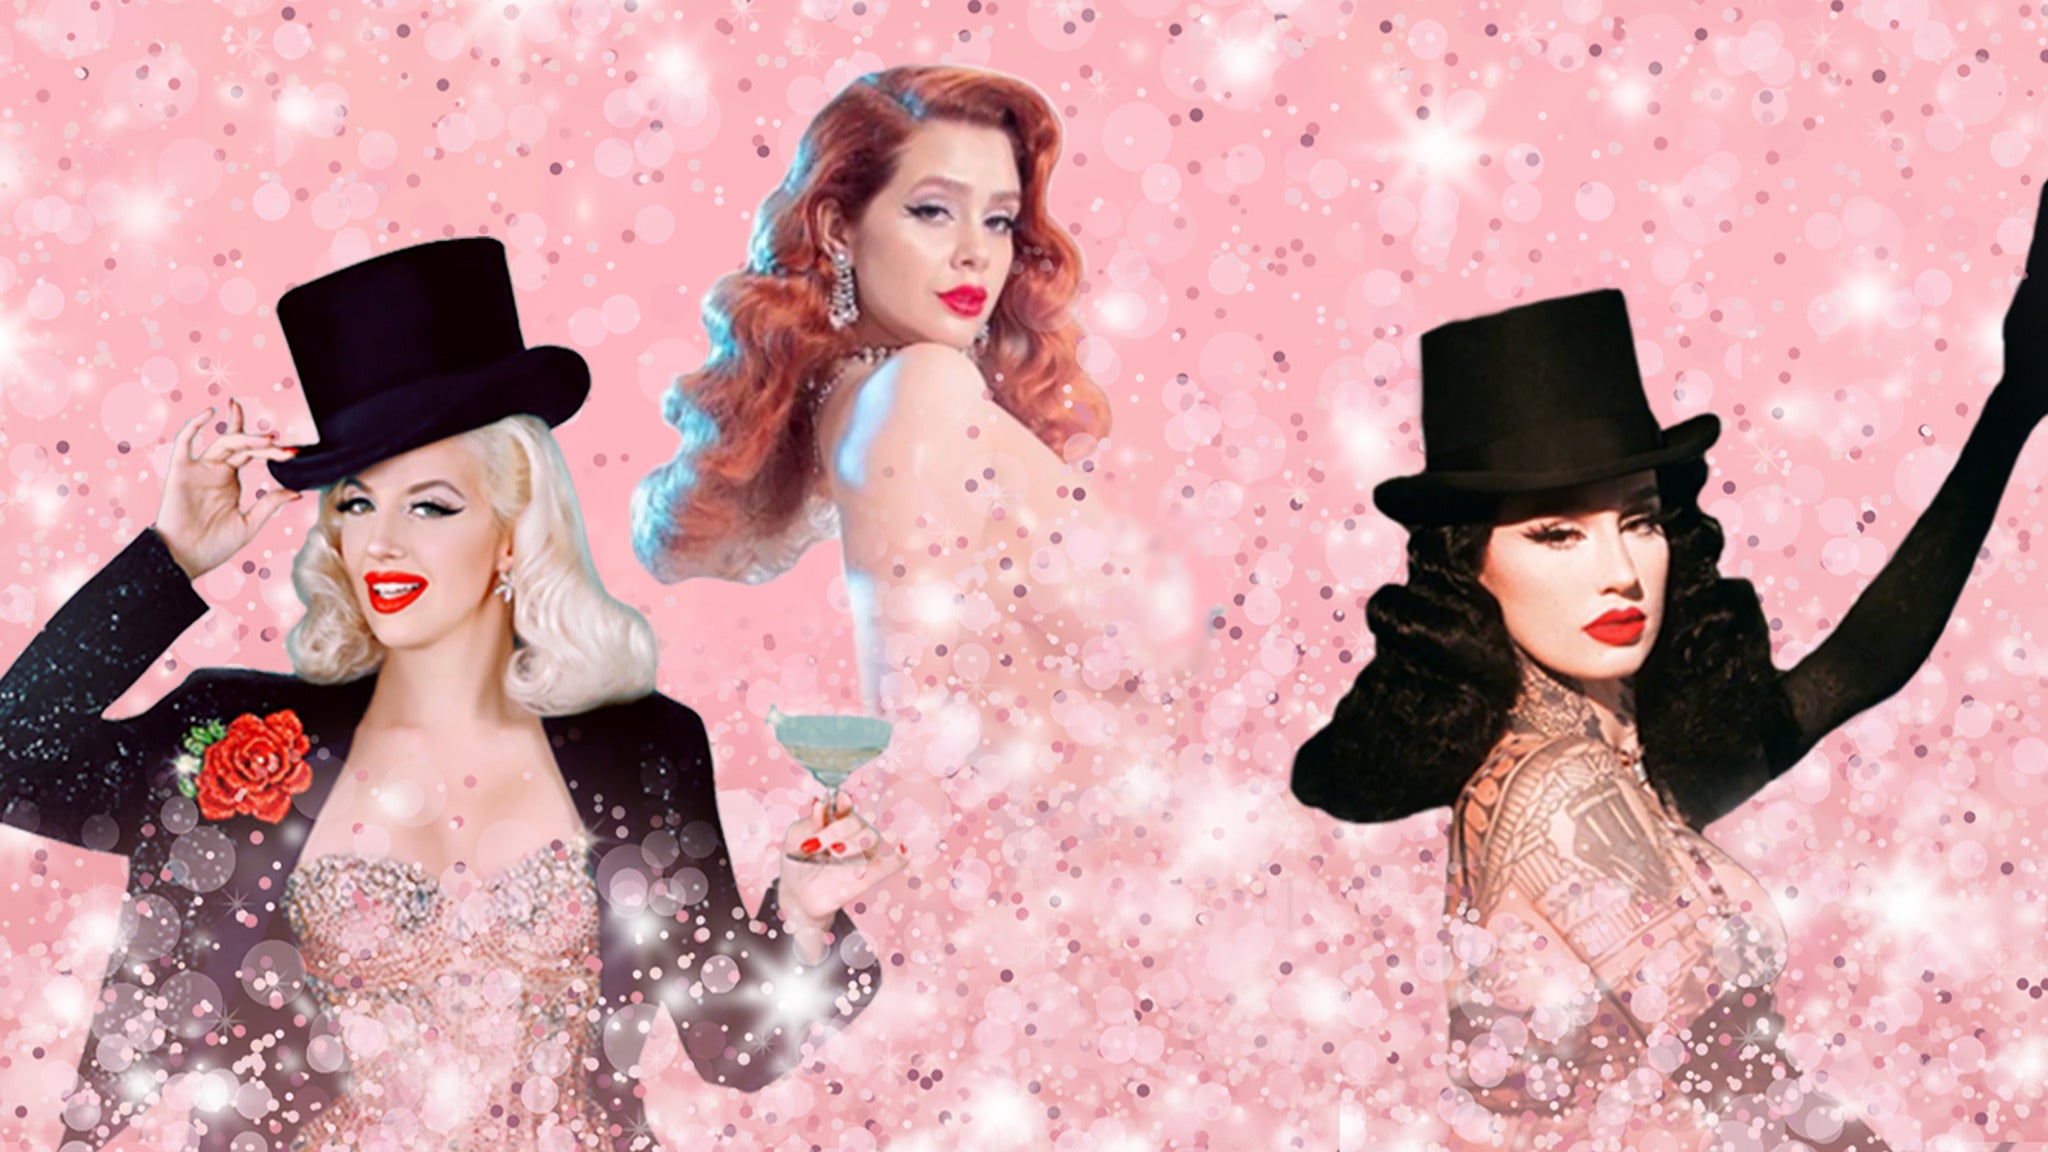 Carousel Club Burlesque in Houston promo photo for Live Nation presale offer code